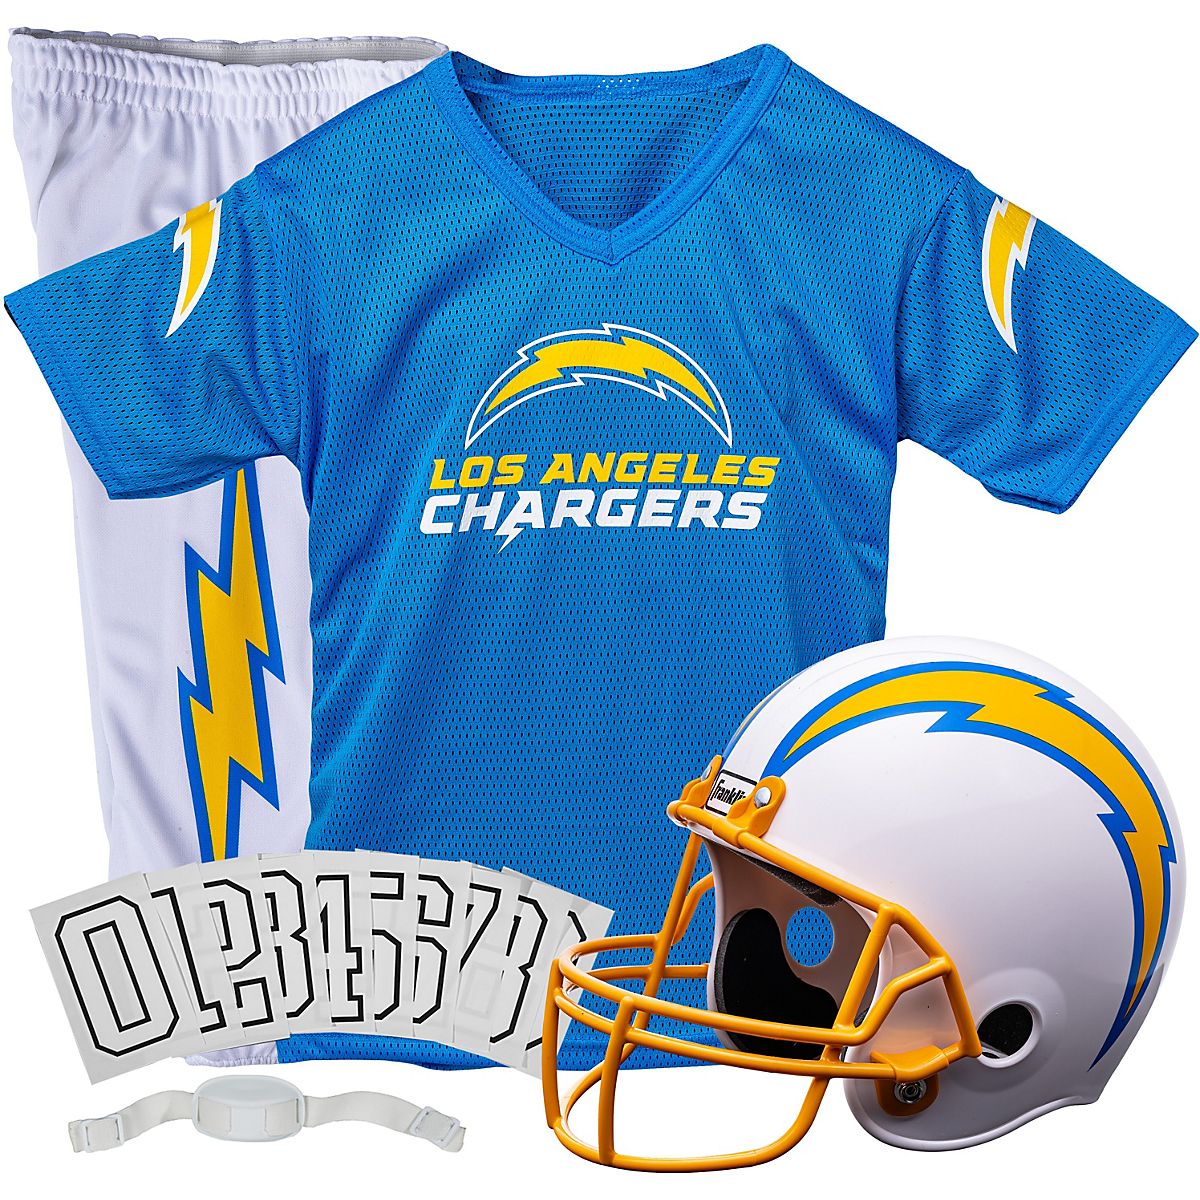 the best uniforms in football are - Los Angeles Chargers